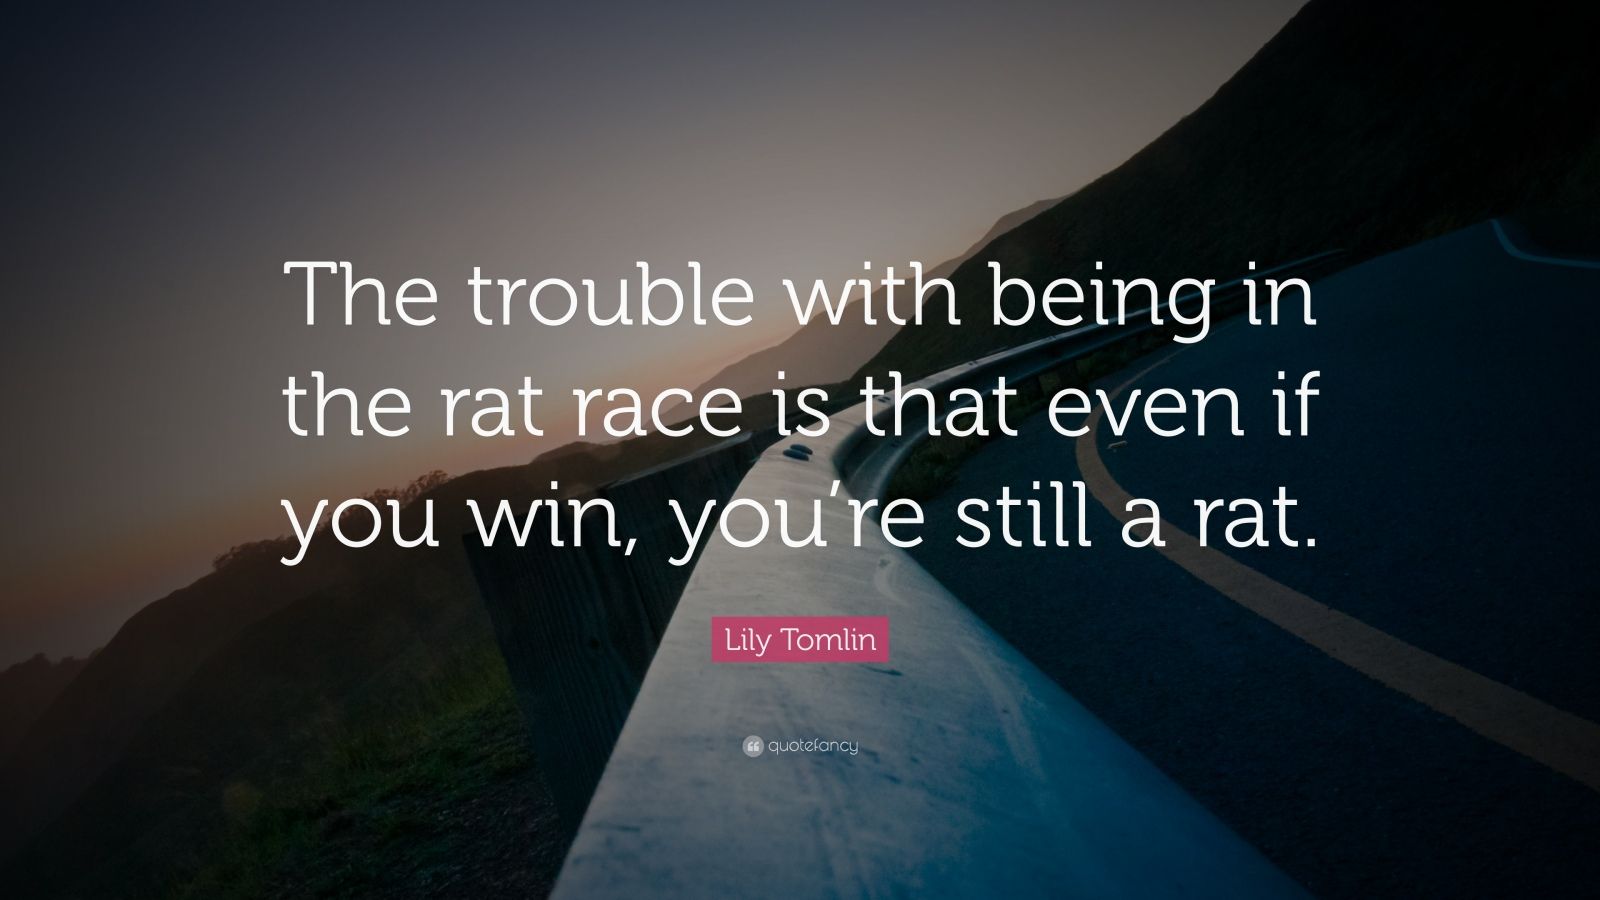 Lily Tomlin Quote: “The trouble with being in the rat race is that even if you win, you're still a rat.”